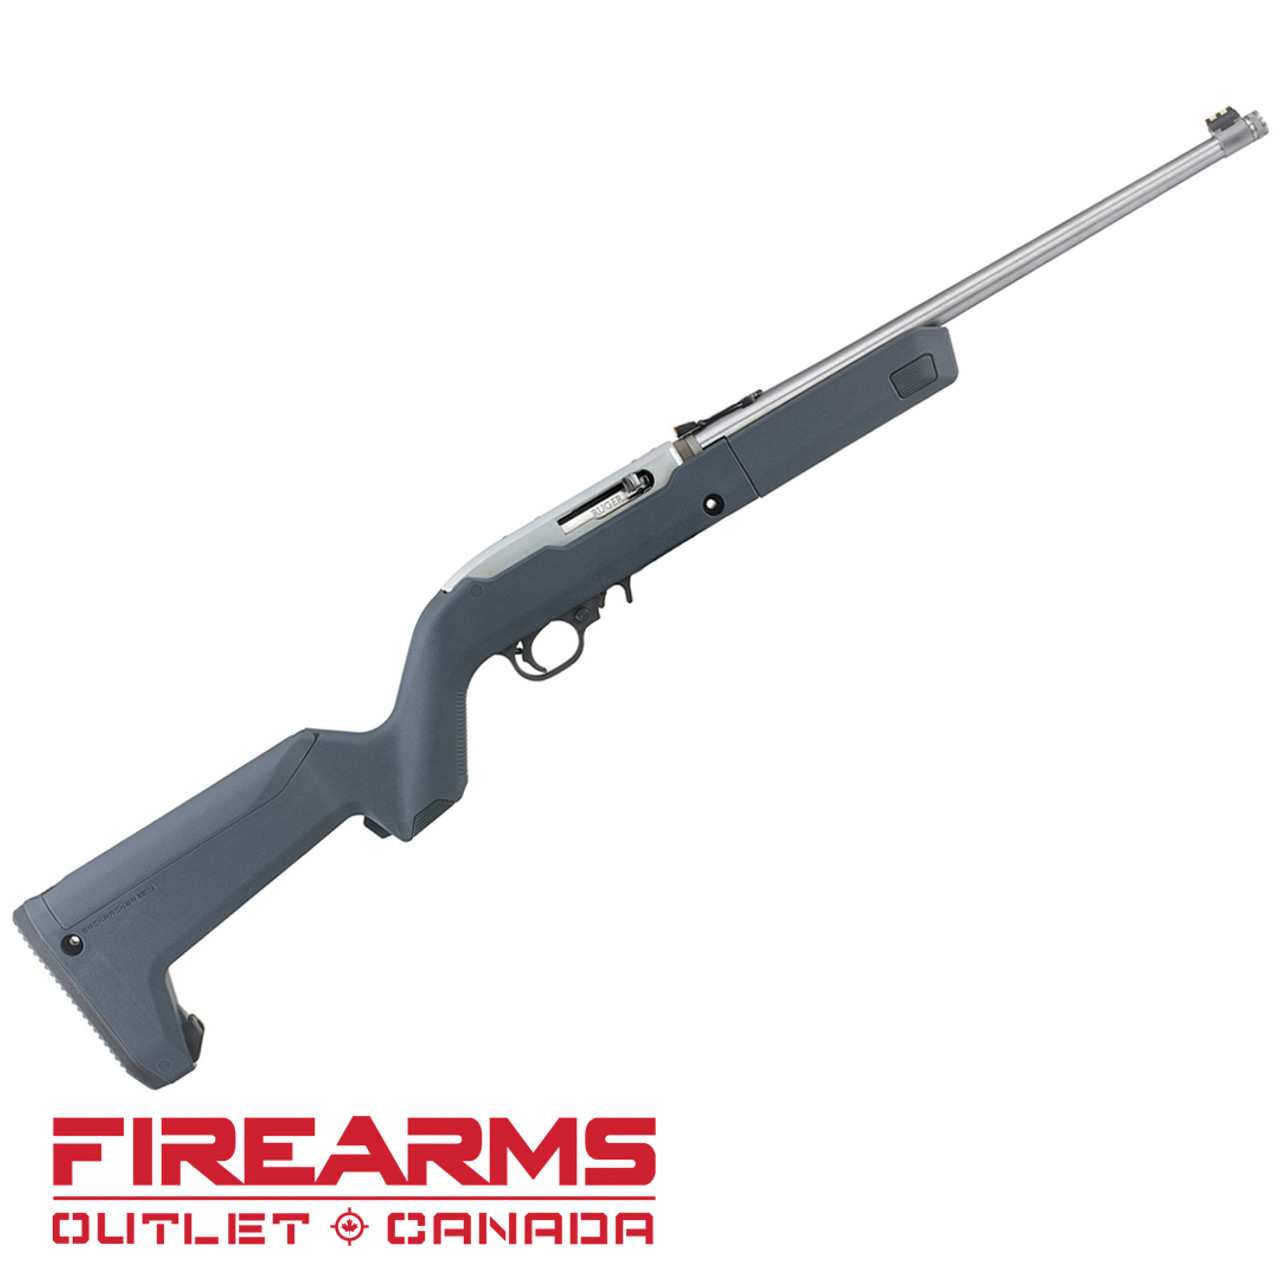 Ruger 10/22 Takedown Stainless Steel (Magpul Exclusive) - .22LR, 16.4", GRY [31152]